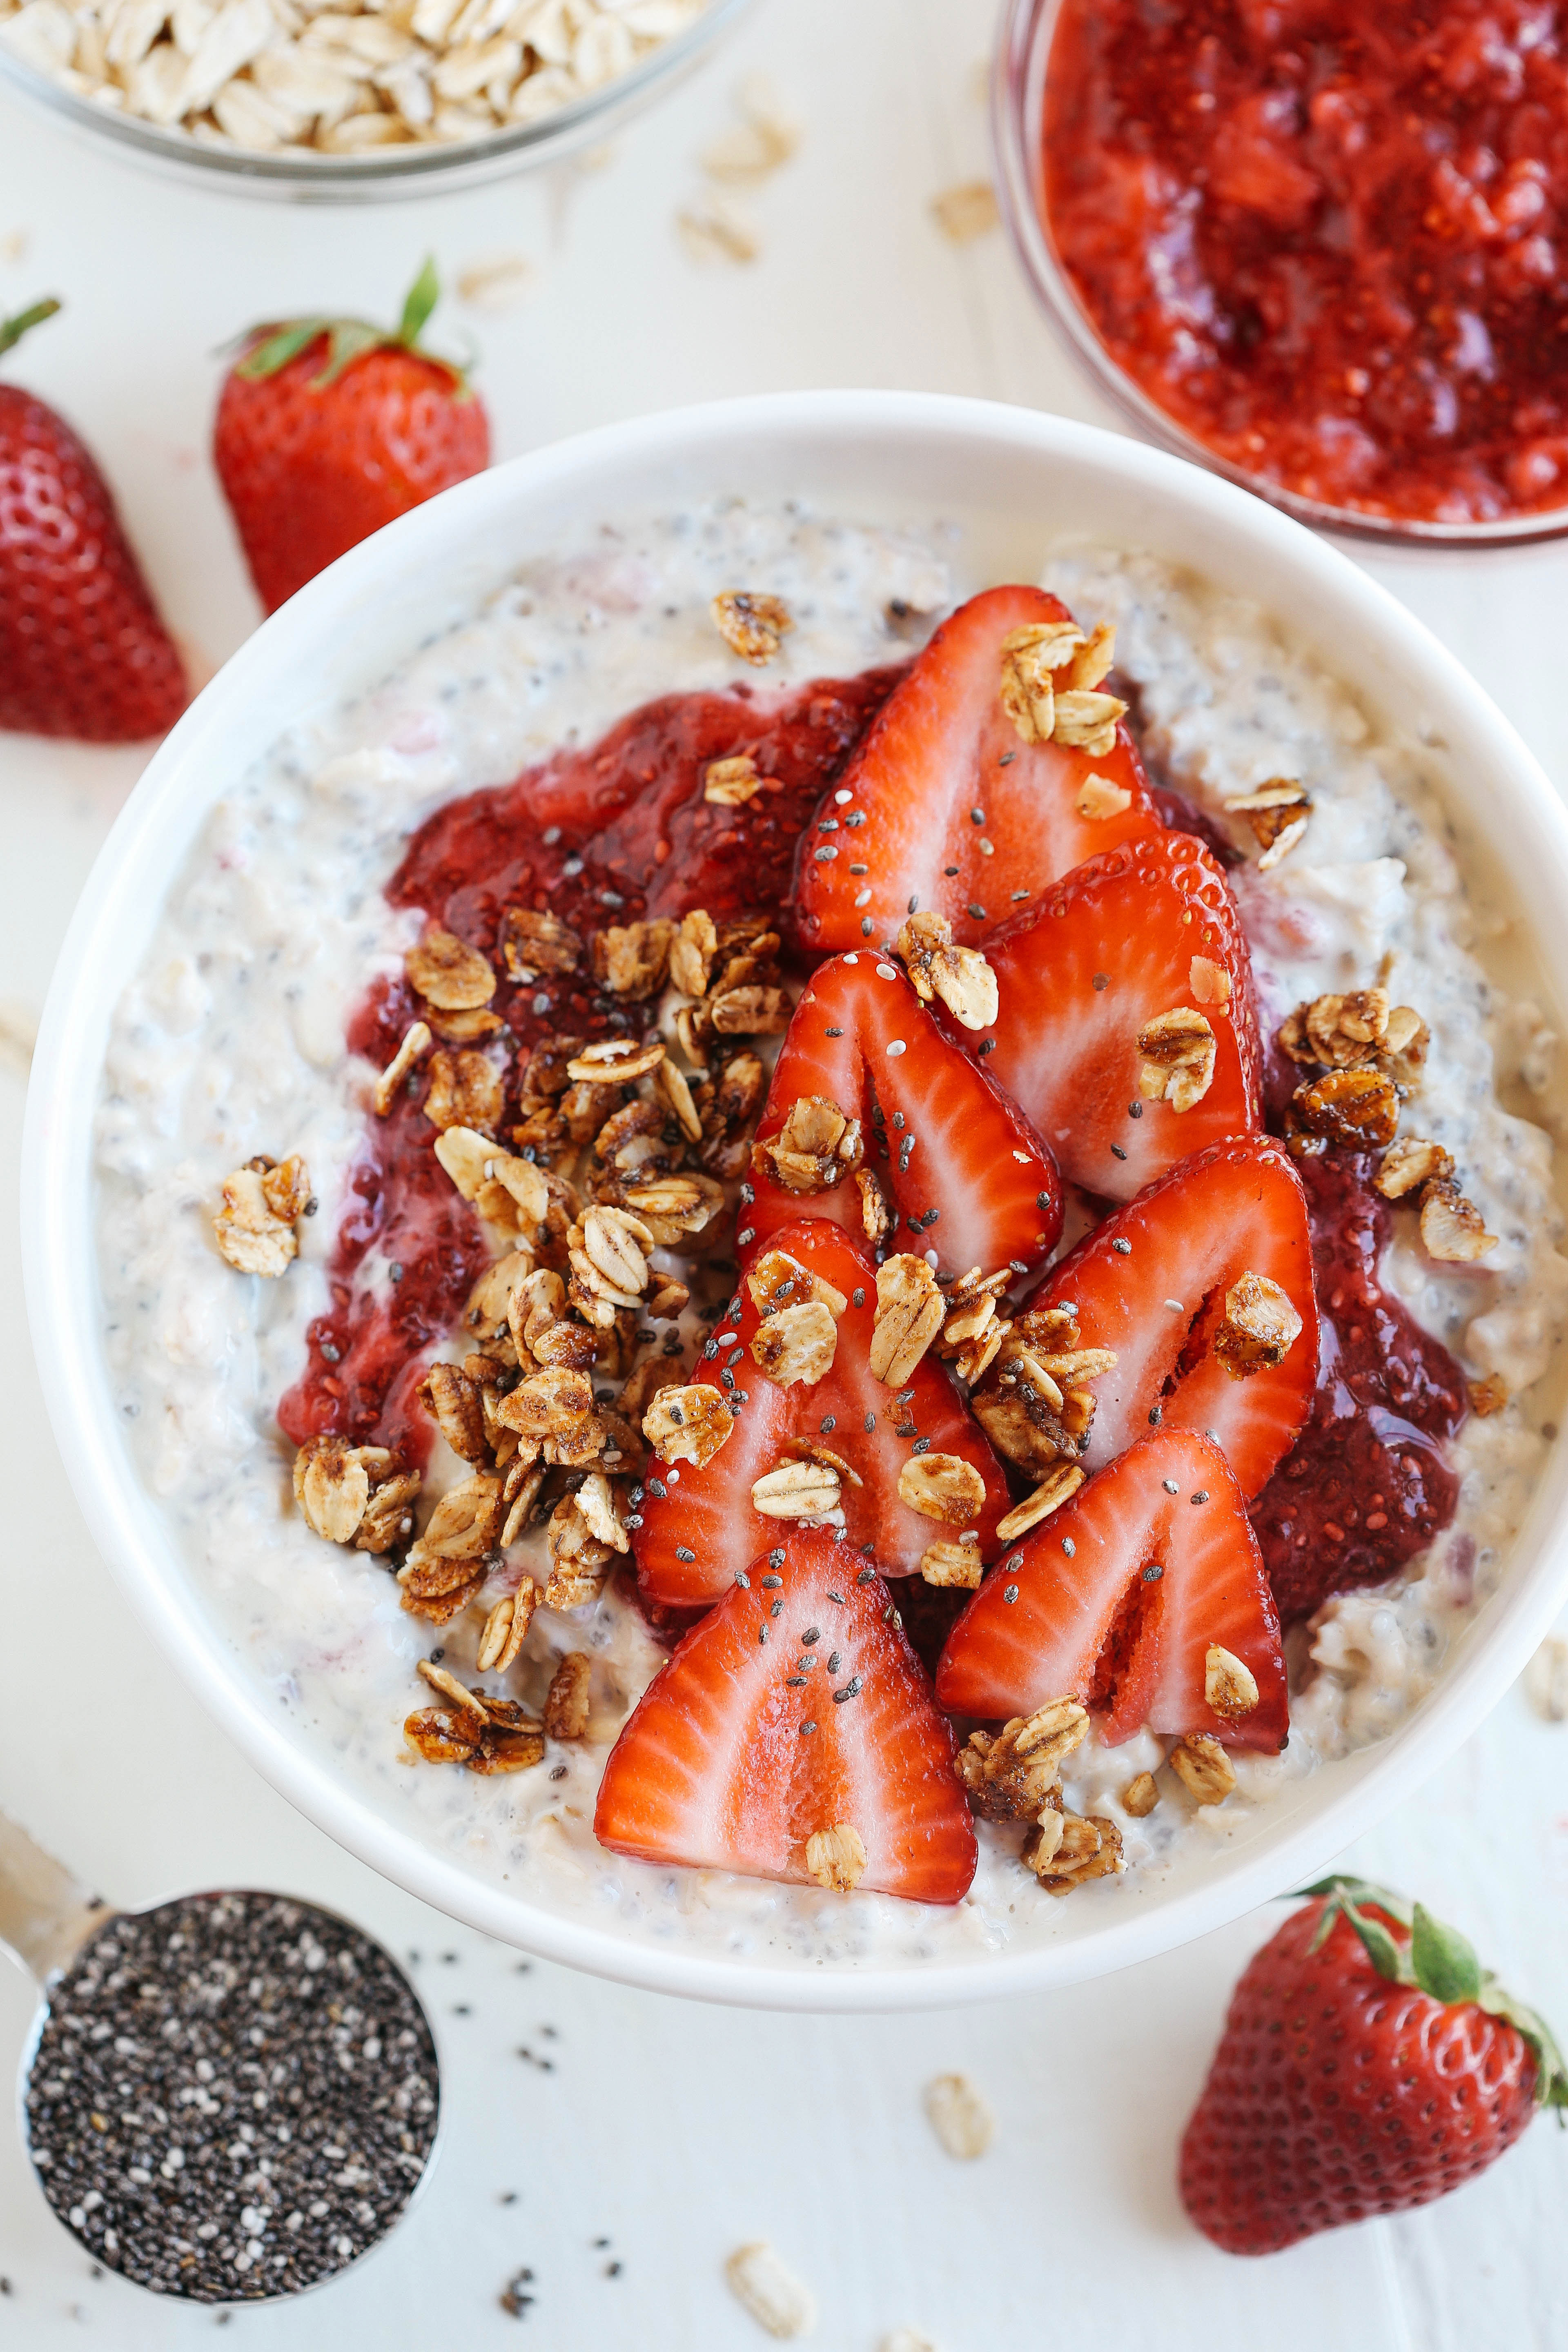 These Strawberry Chia Overnight Oats with homemade chia seed jam are easily made in just minutes the night before giving you a delicious healthy breakfast to enjoy as soon as you wake up! 